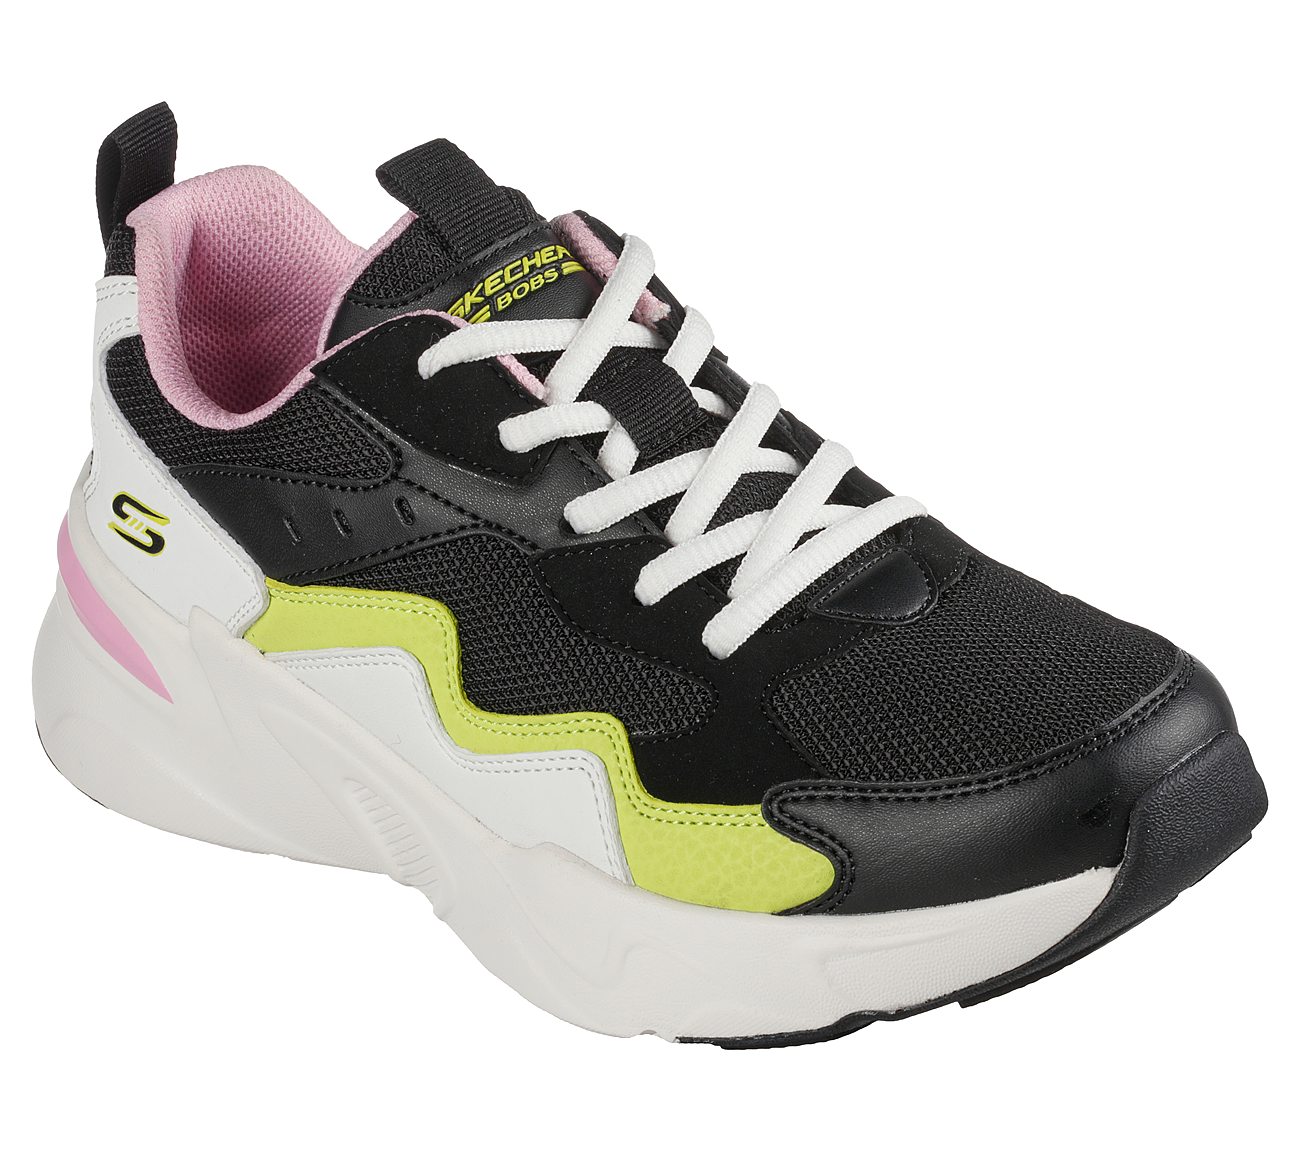 BOBS BAMINA-ZIGZAGGER, BLACK/LIME Footwear Right View